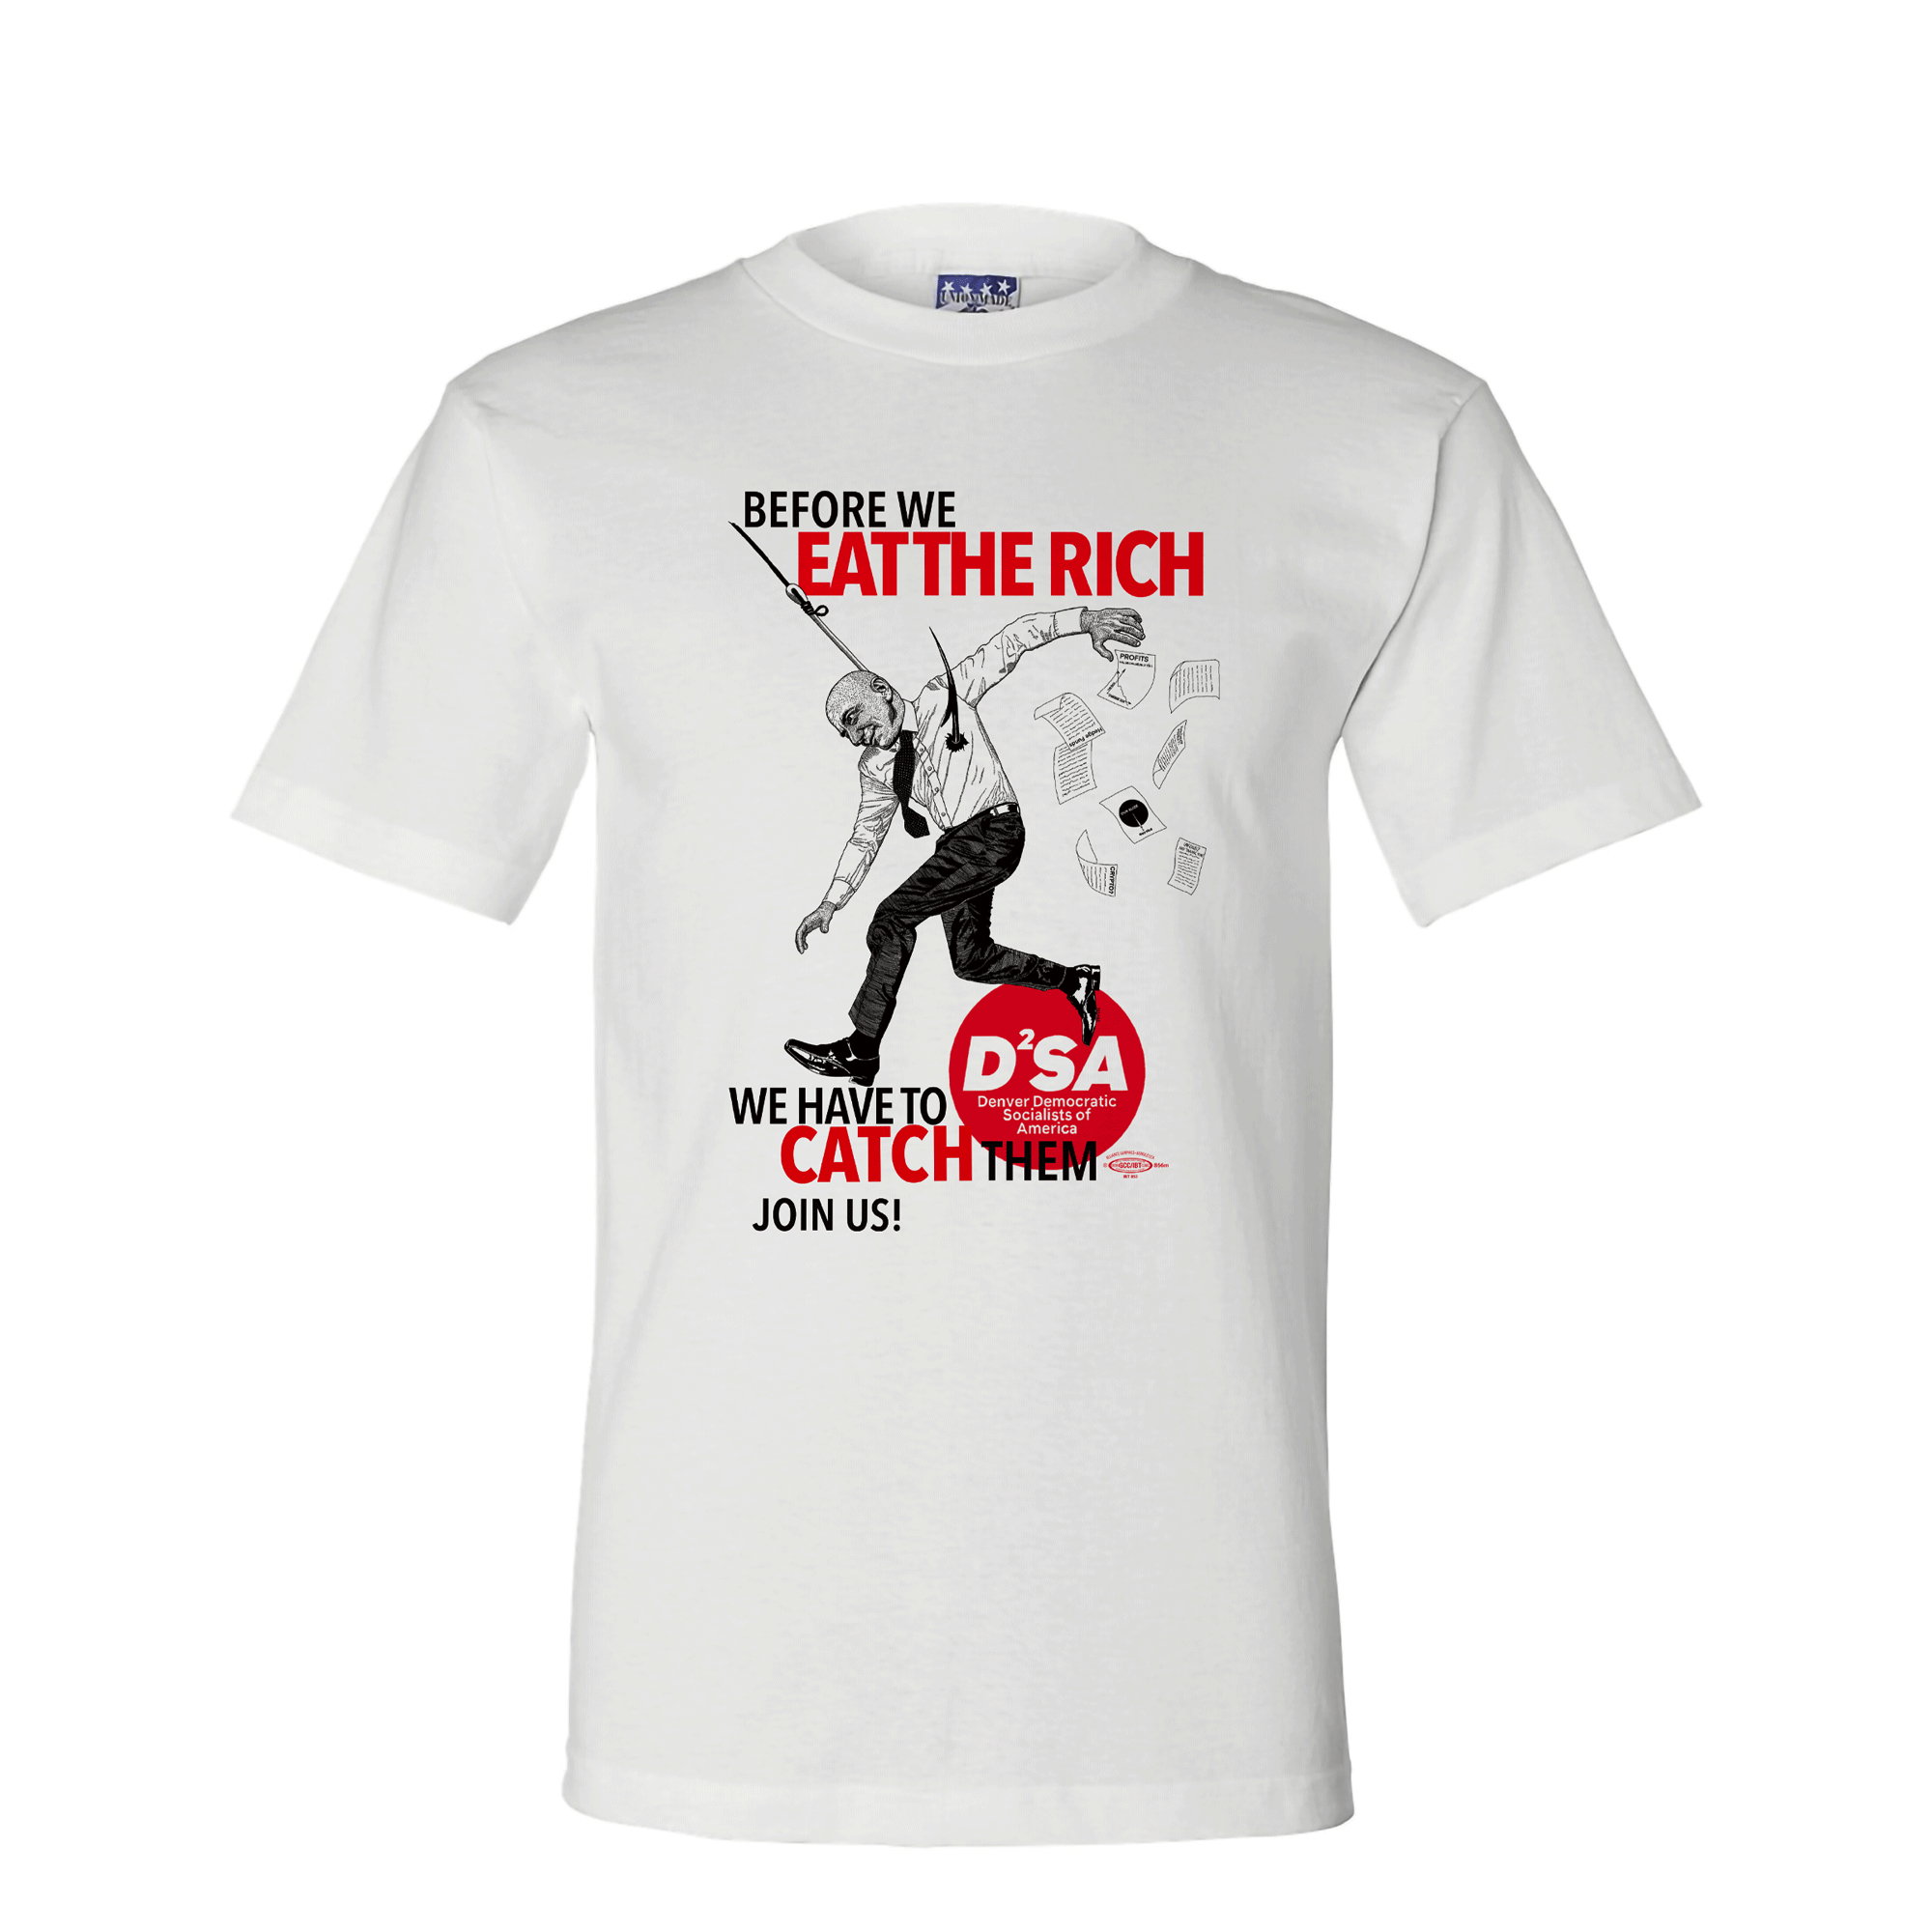 Union made white short sleeve t-shirt with a rich man on a fishing hook that says ‘Before we eat the rich we have to catch them Join us’